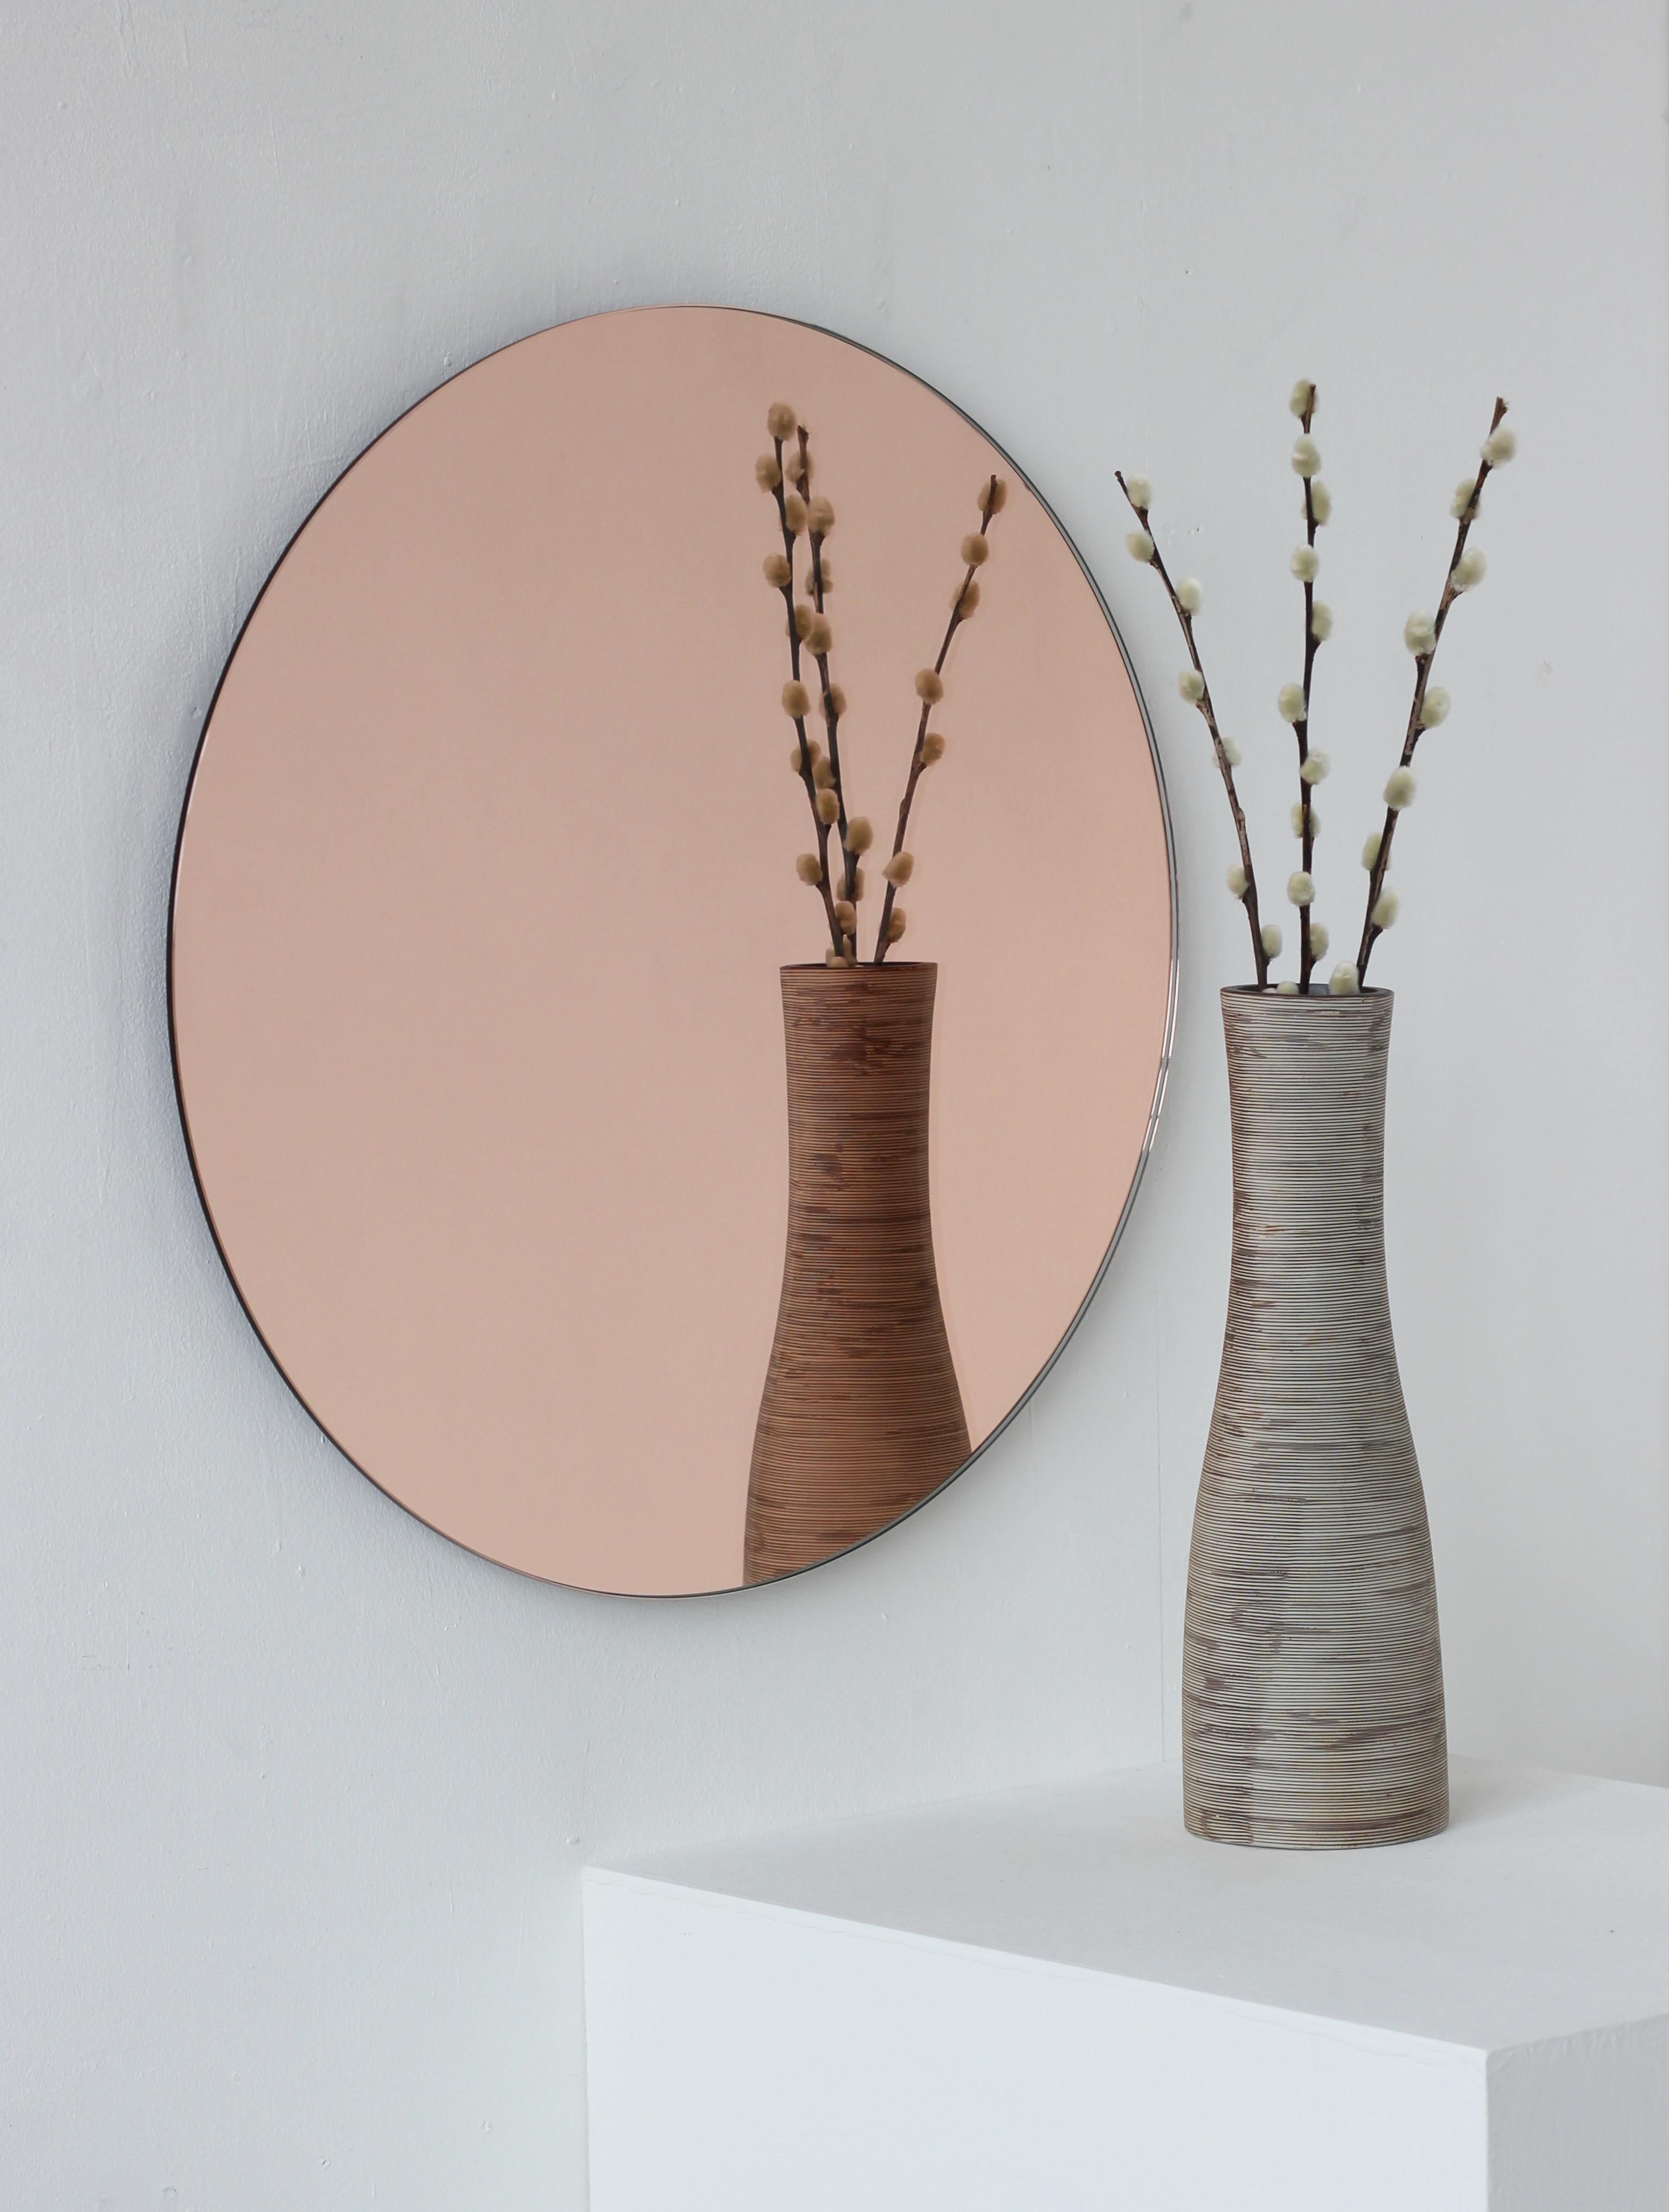 Available from stock.

Charming and minimalist rose gold / peach tinted round frameless mirror with a floating effect. Quality design that ensures the mirror sits perfectly parallel to the wall. Designed and made in London, UK.

Fitted with